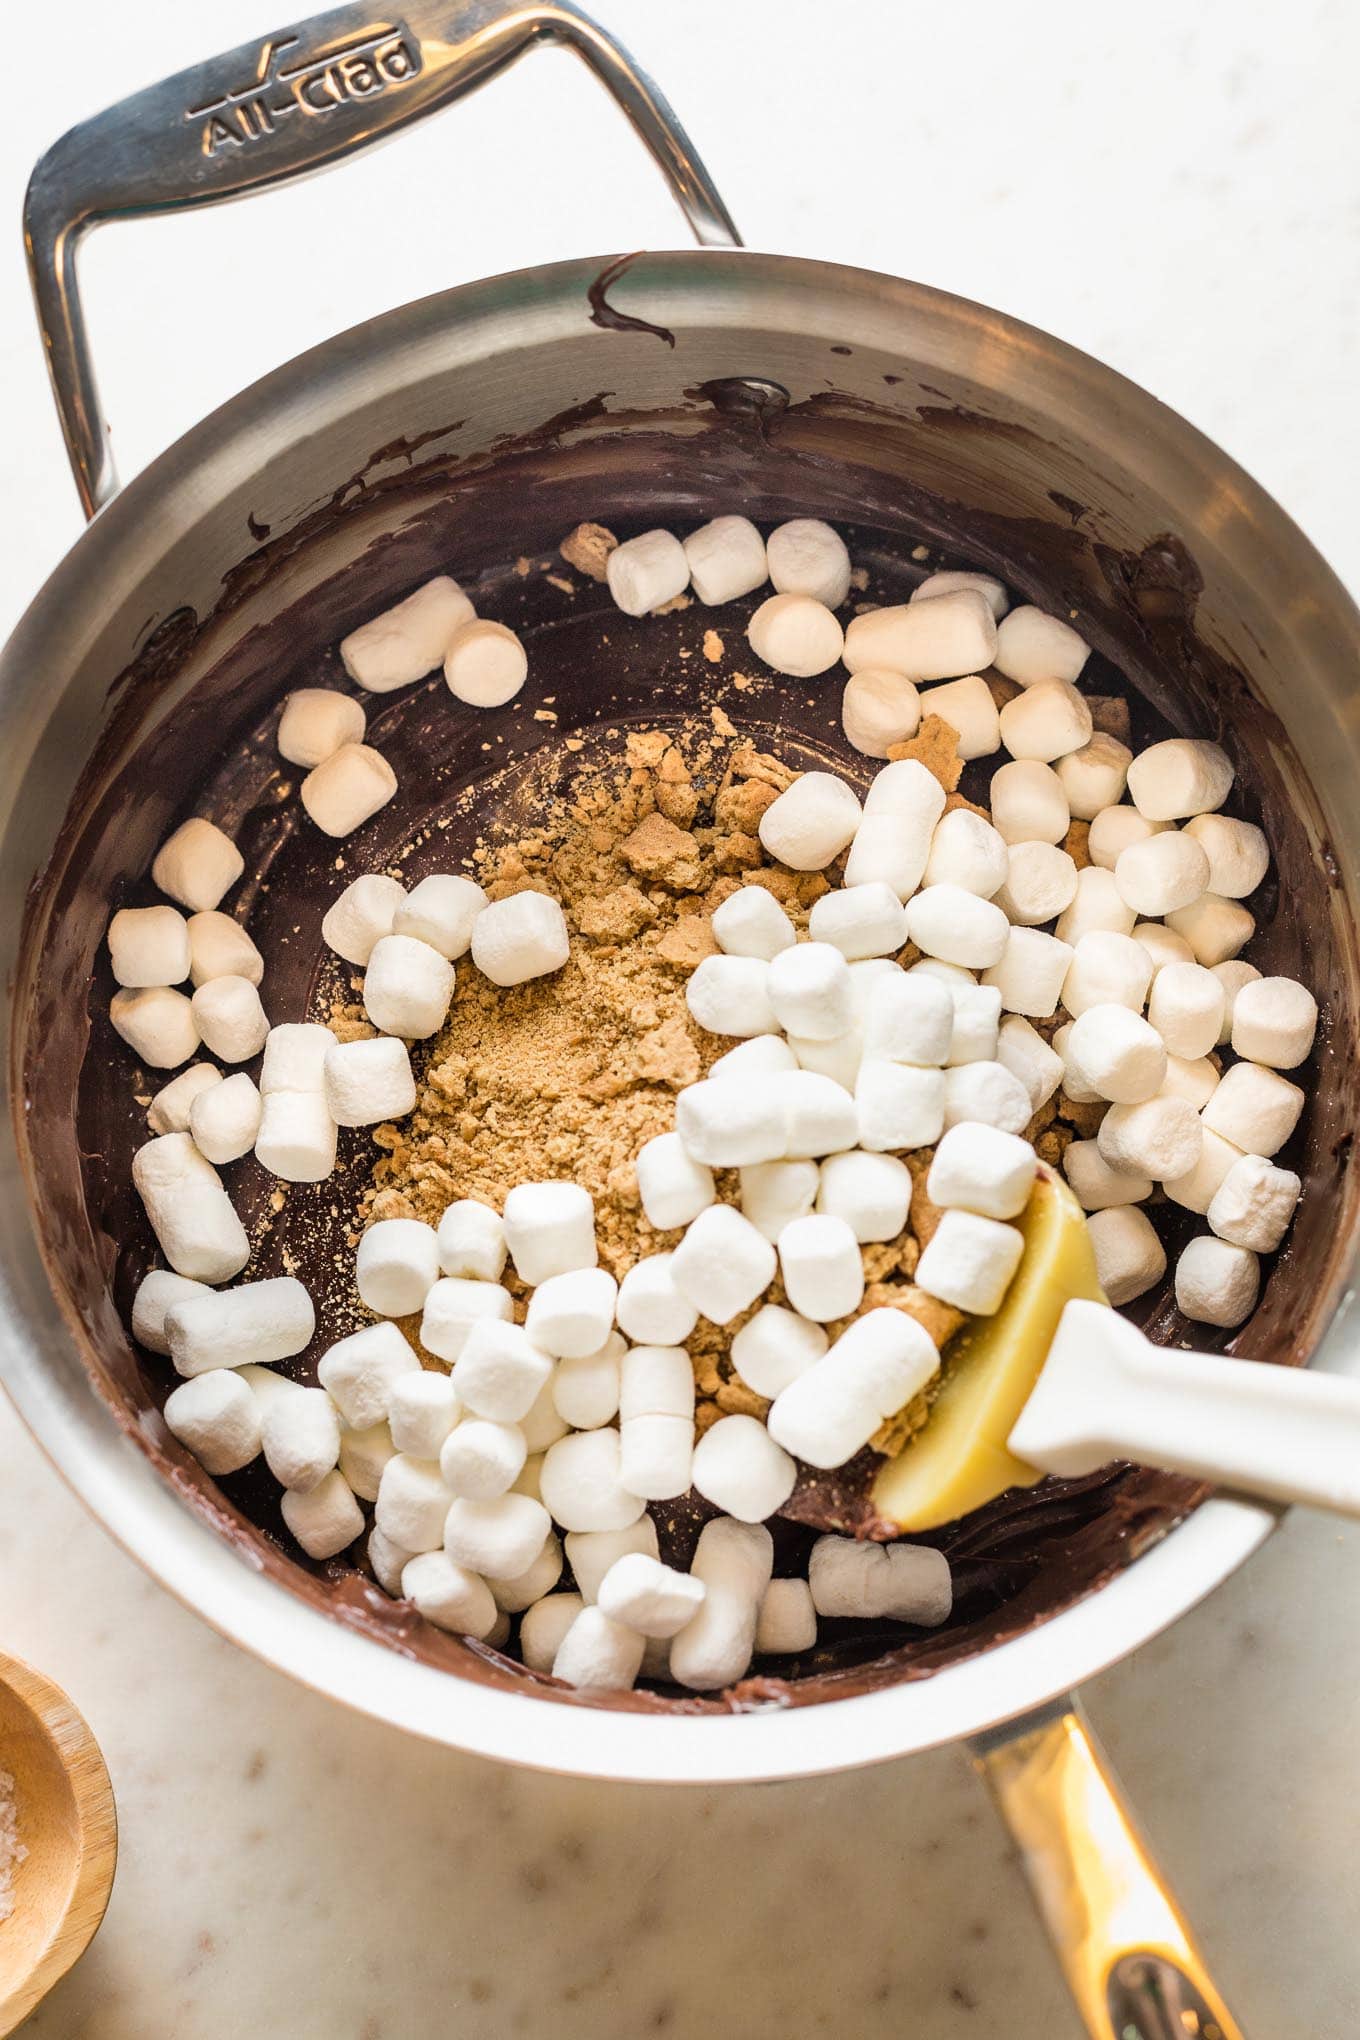 Crushed graham crackers and mini marshmallows added to melted chocolate in saucepan.